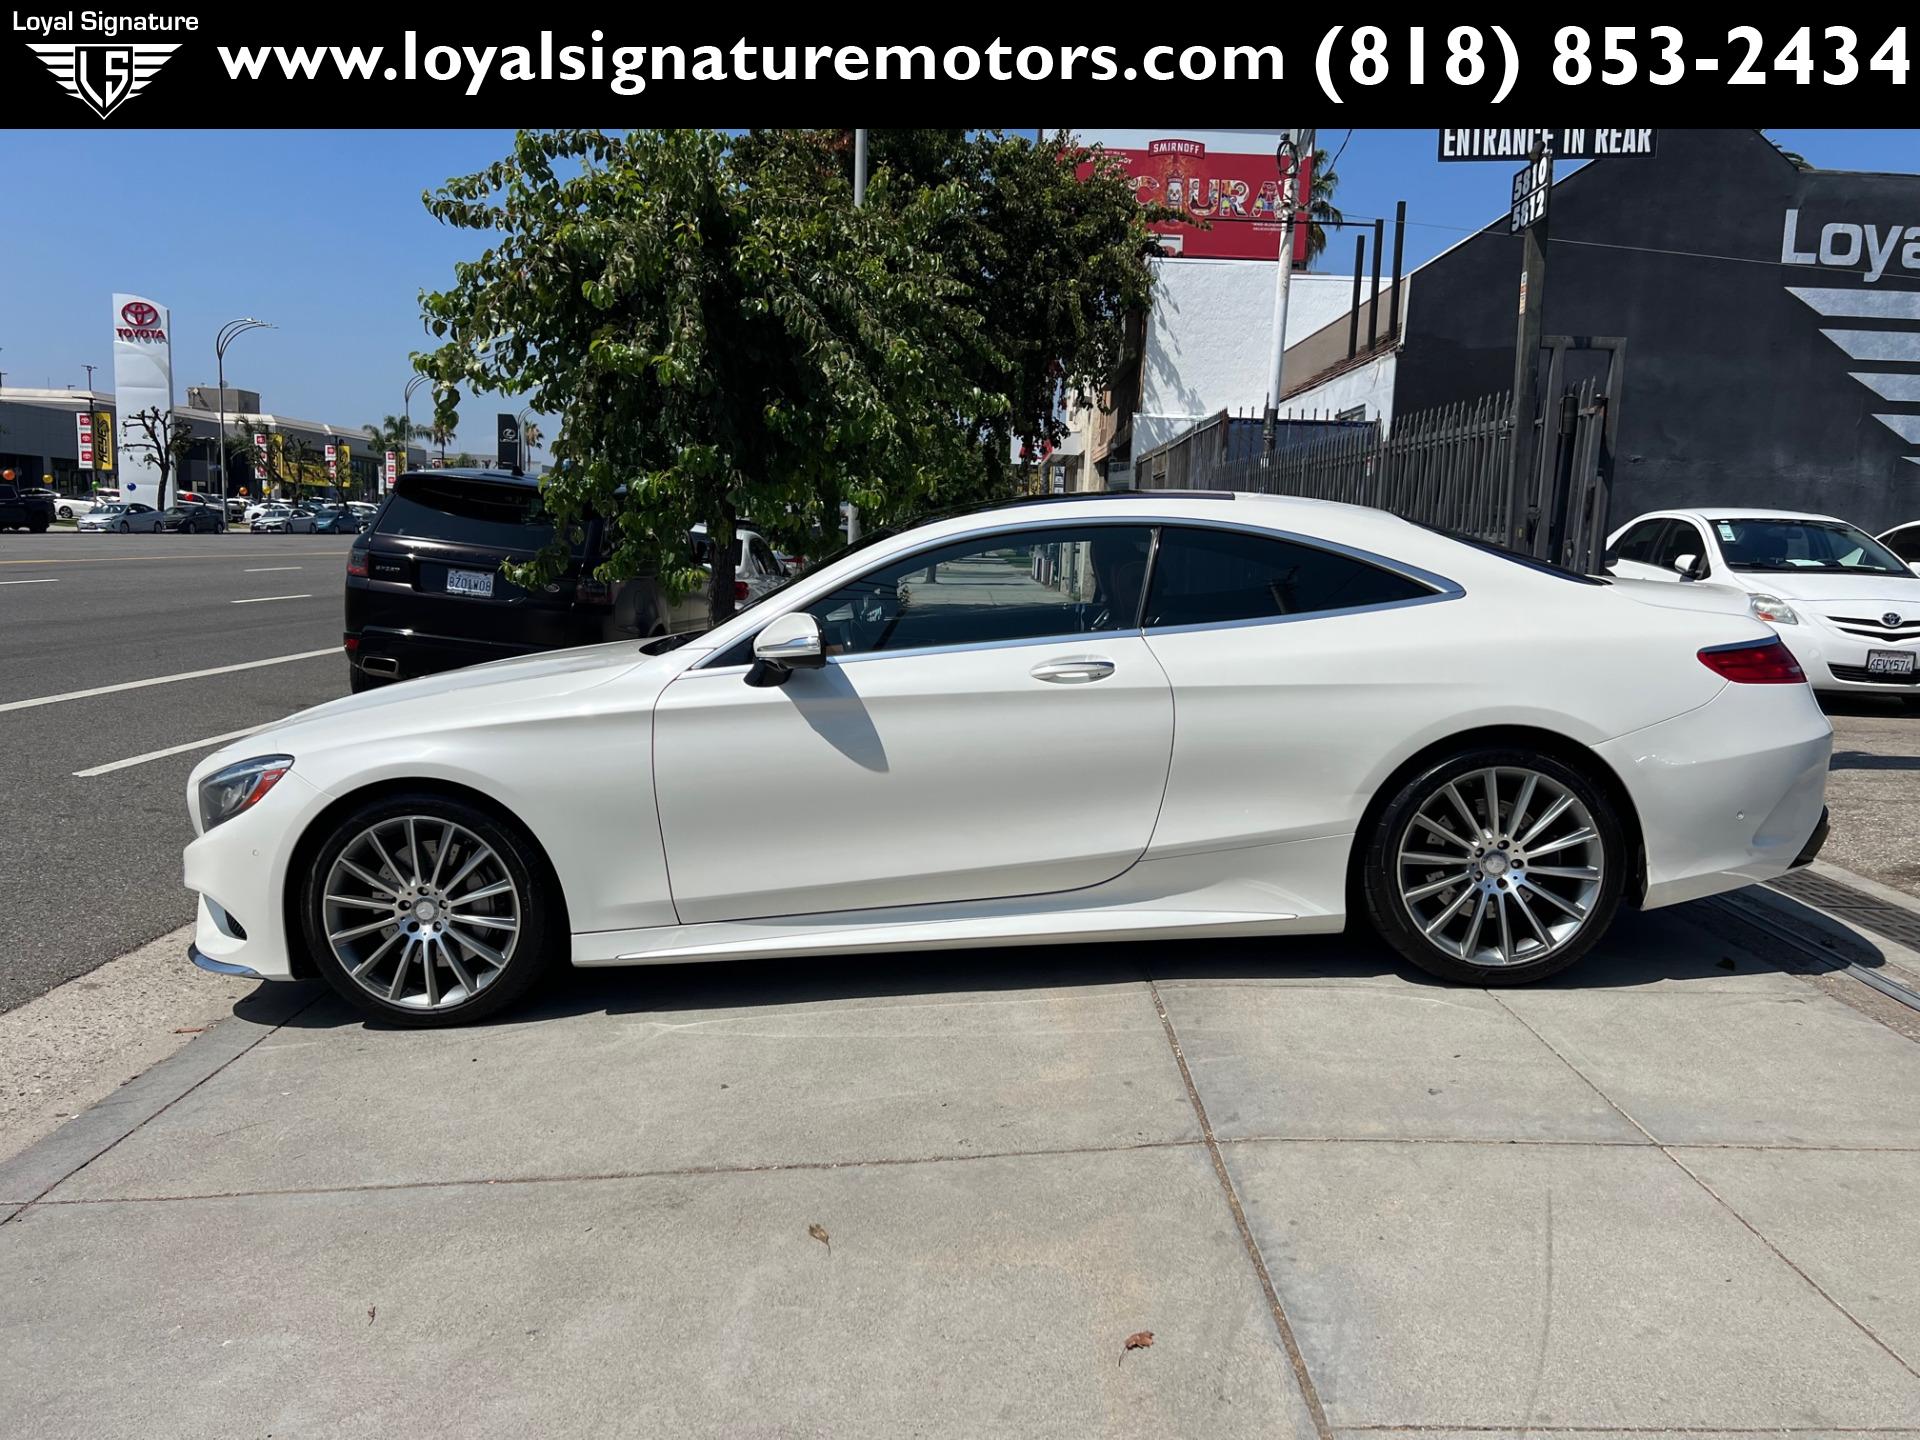 Used-2015-Mercedes-Benz-S-Class-S-550-4MATIC